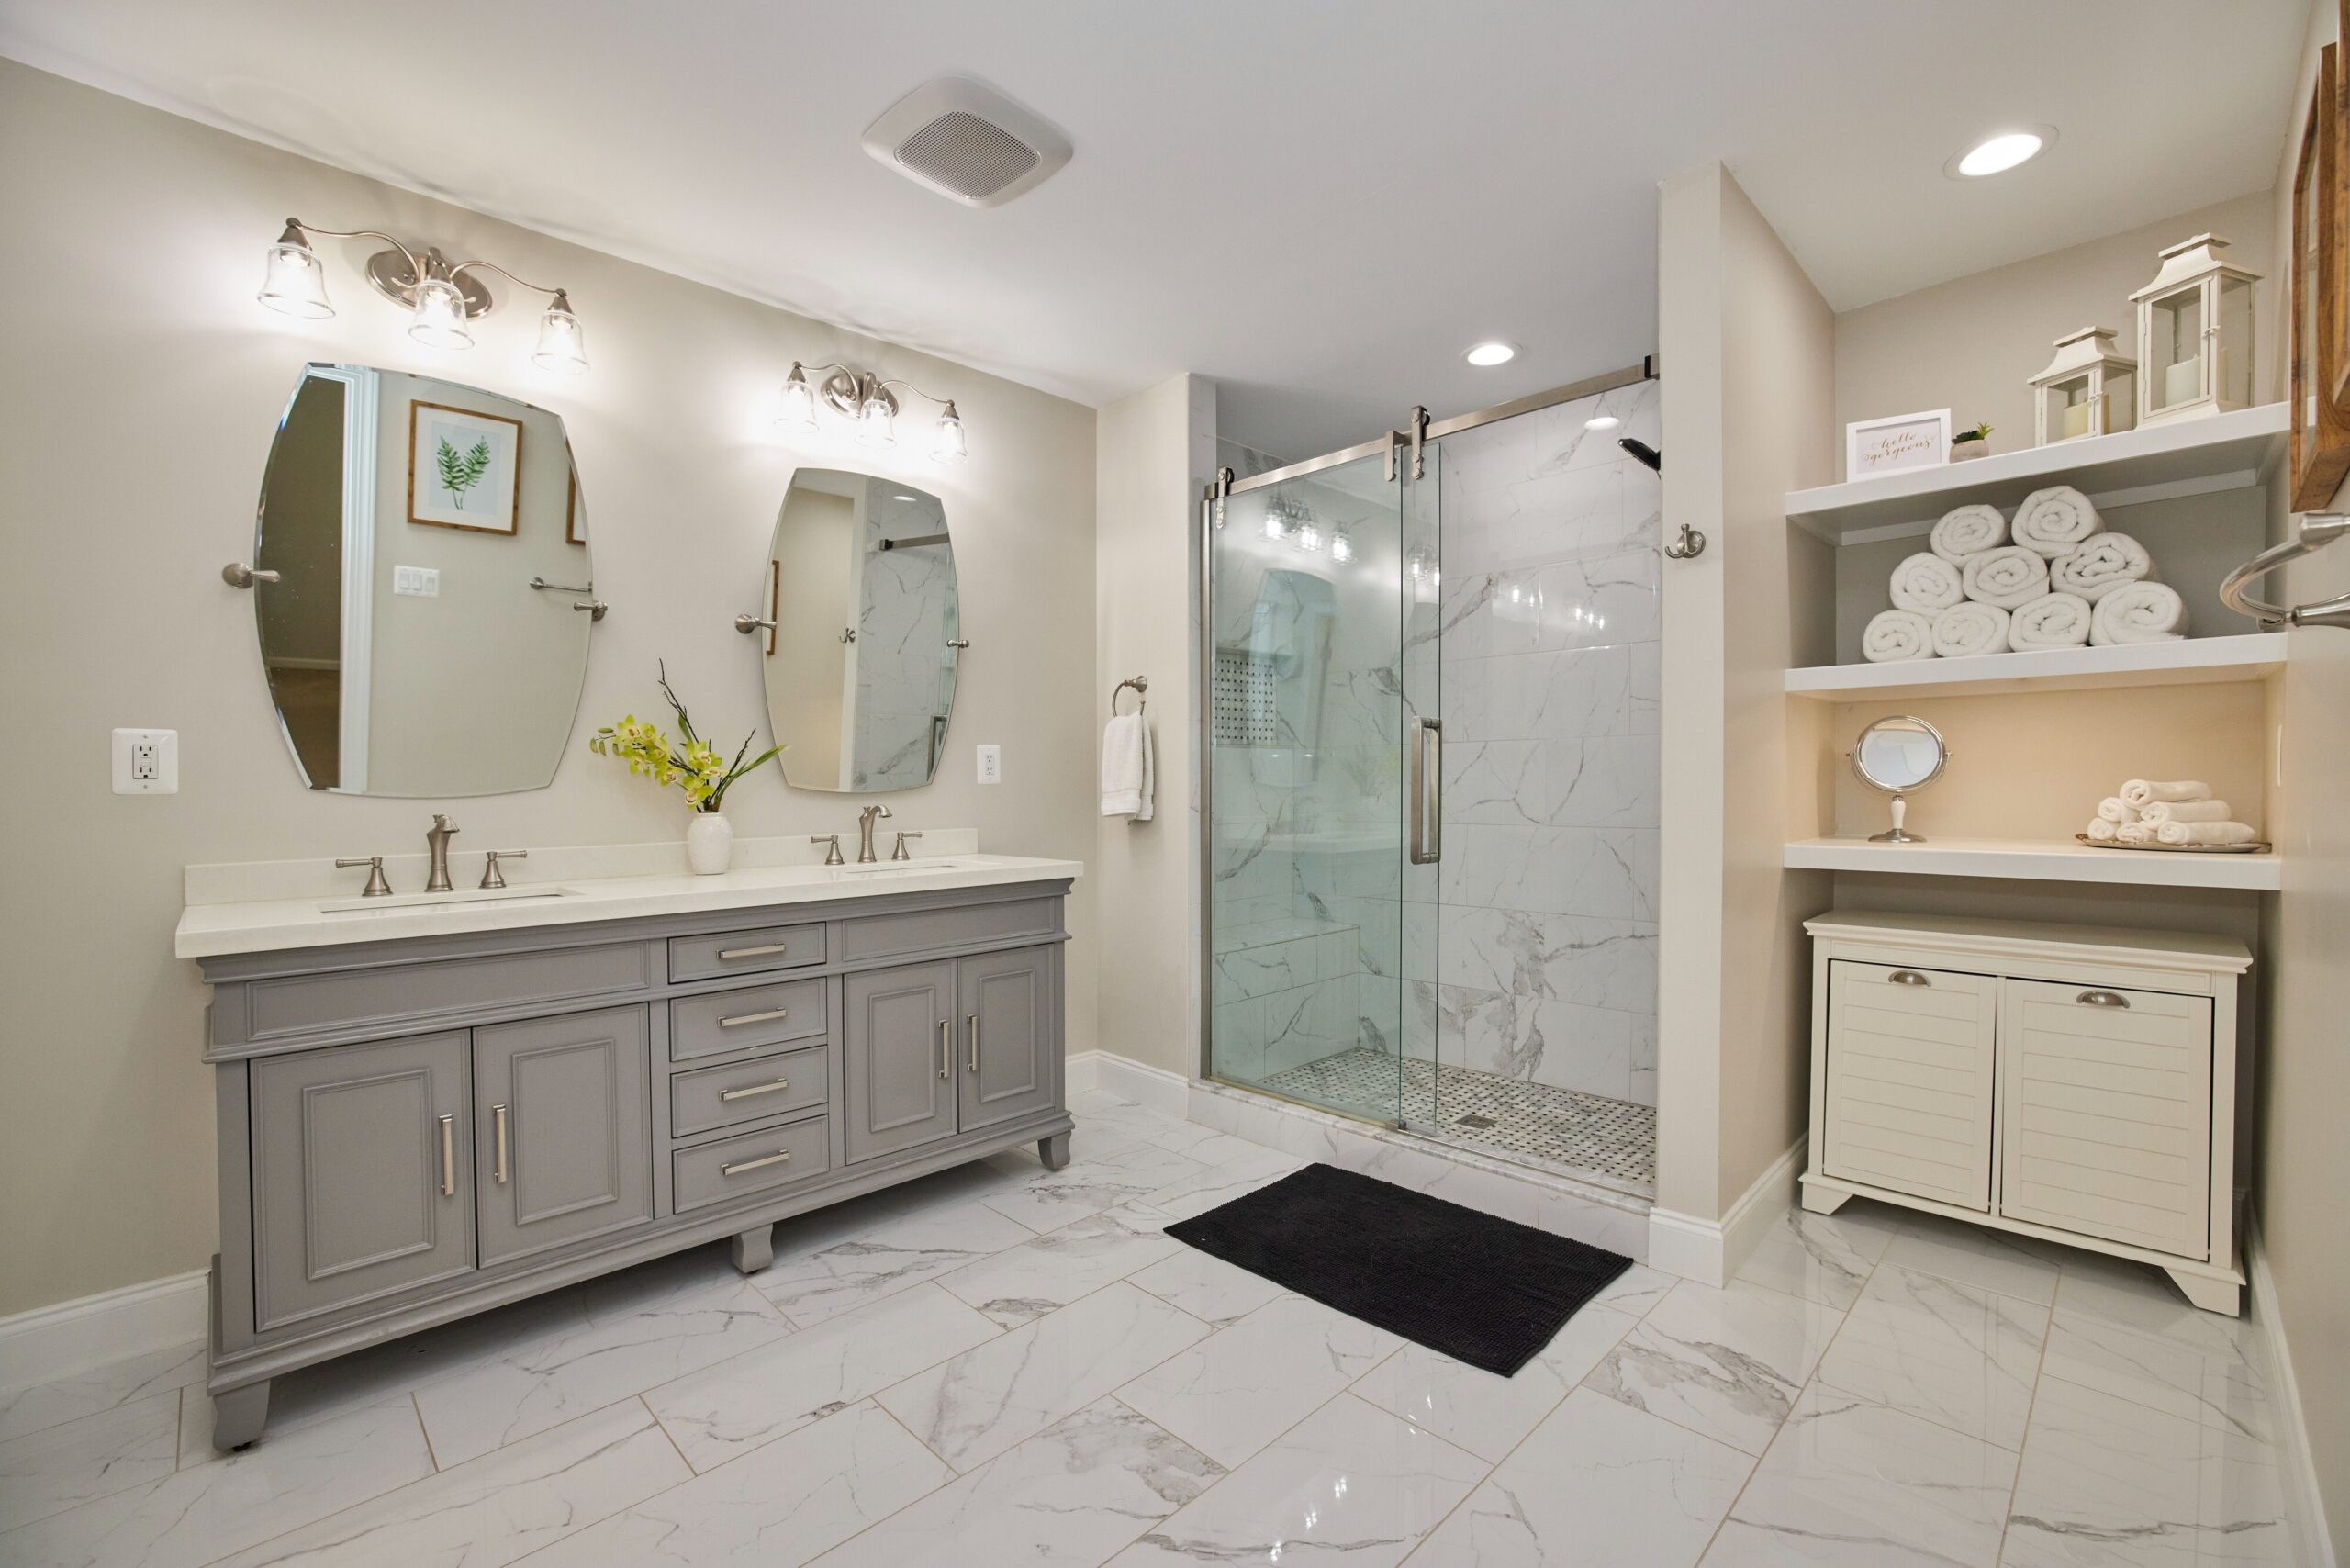 Professional interior photo of 12030 Lake Dorian Drive, Bristow, VA - showing the primary bathroom with dual vanity, large zero-entry shower and open linen shelves and white quartz tile floors